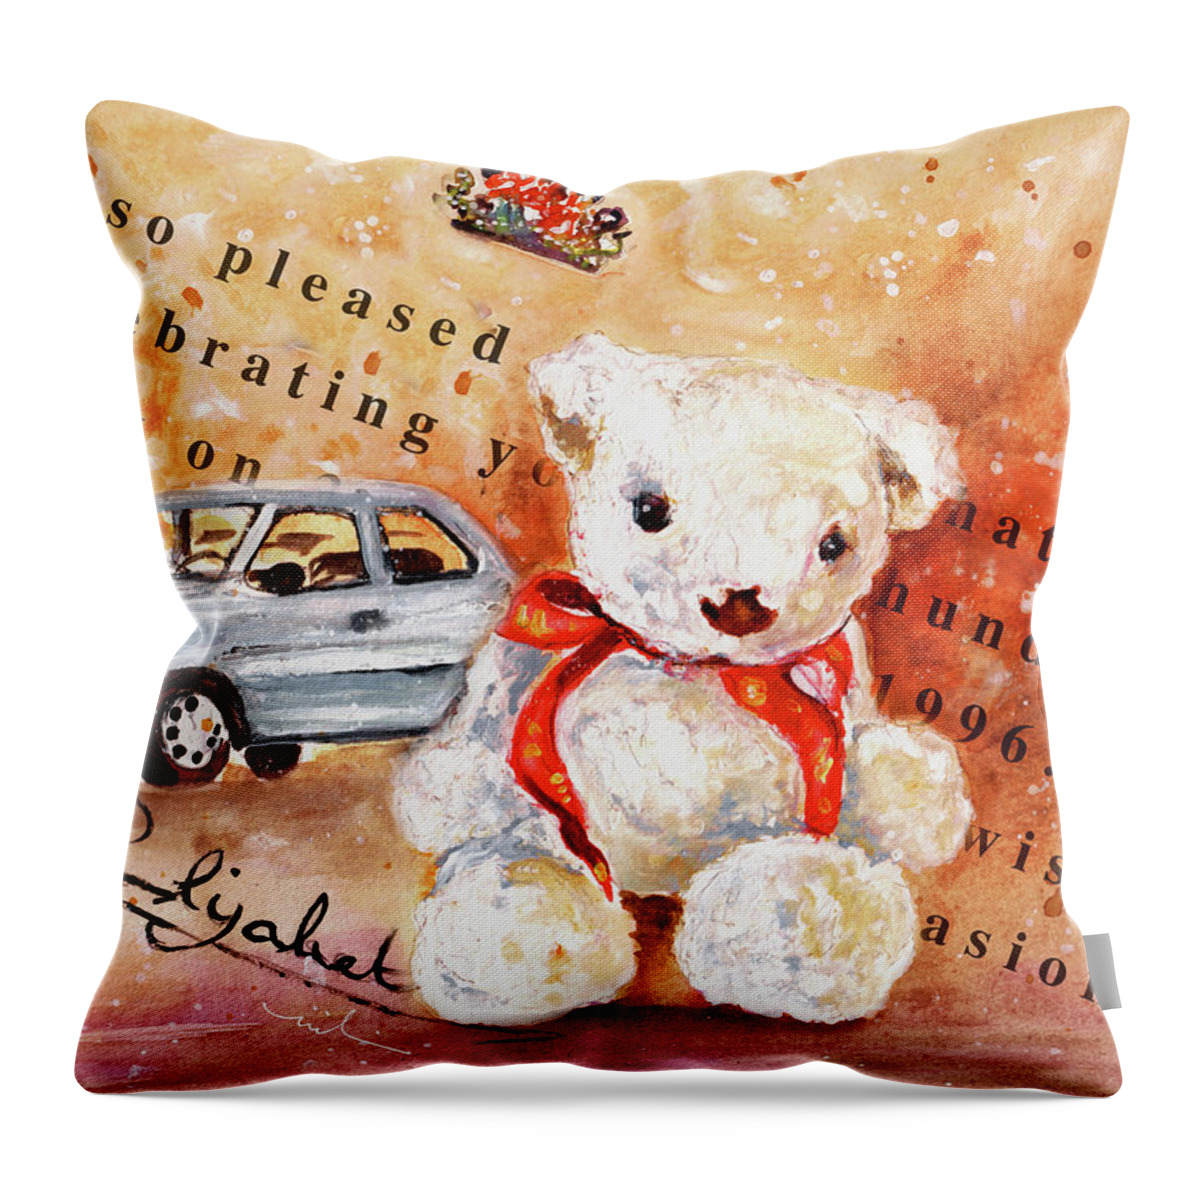 Truffle Mcfurry Throw Pillow featuring the painting Teddy Bear William by Miki De Goodaboom